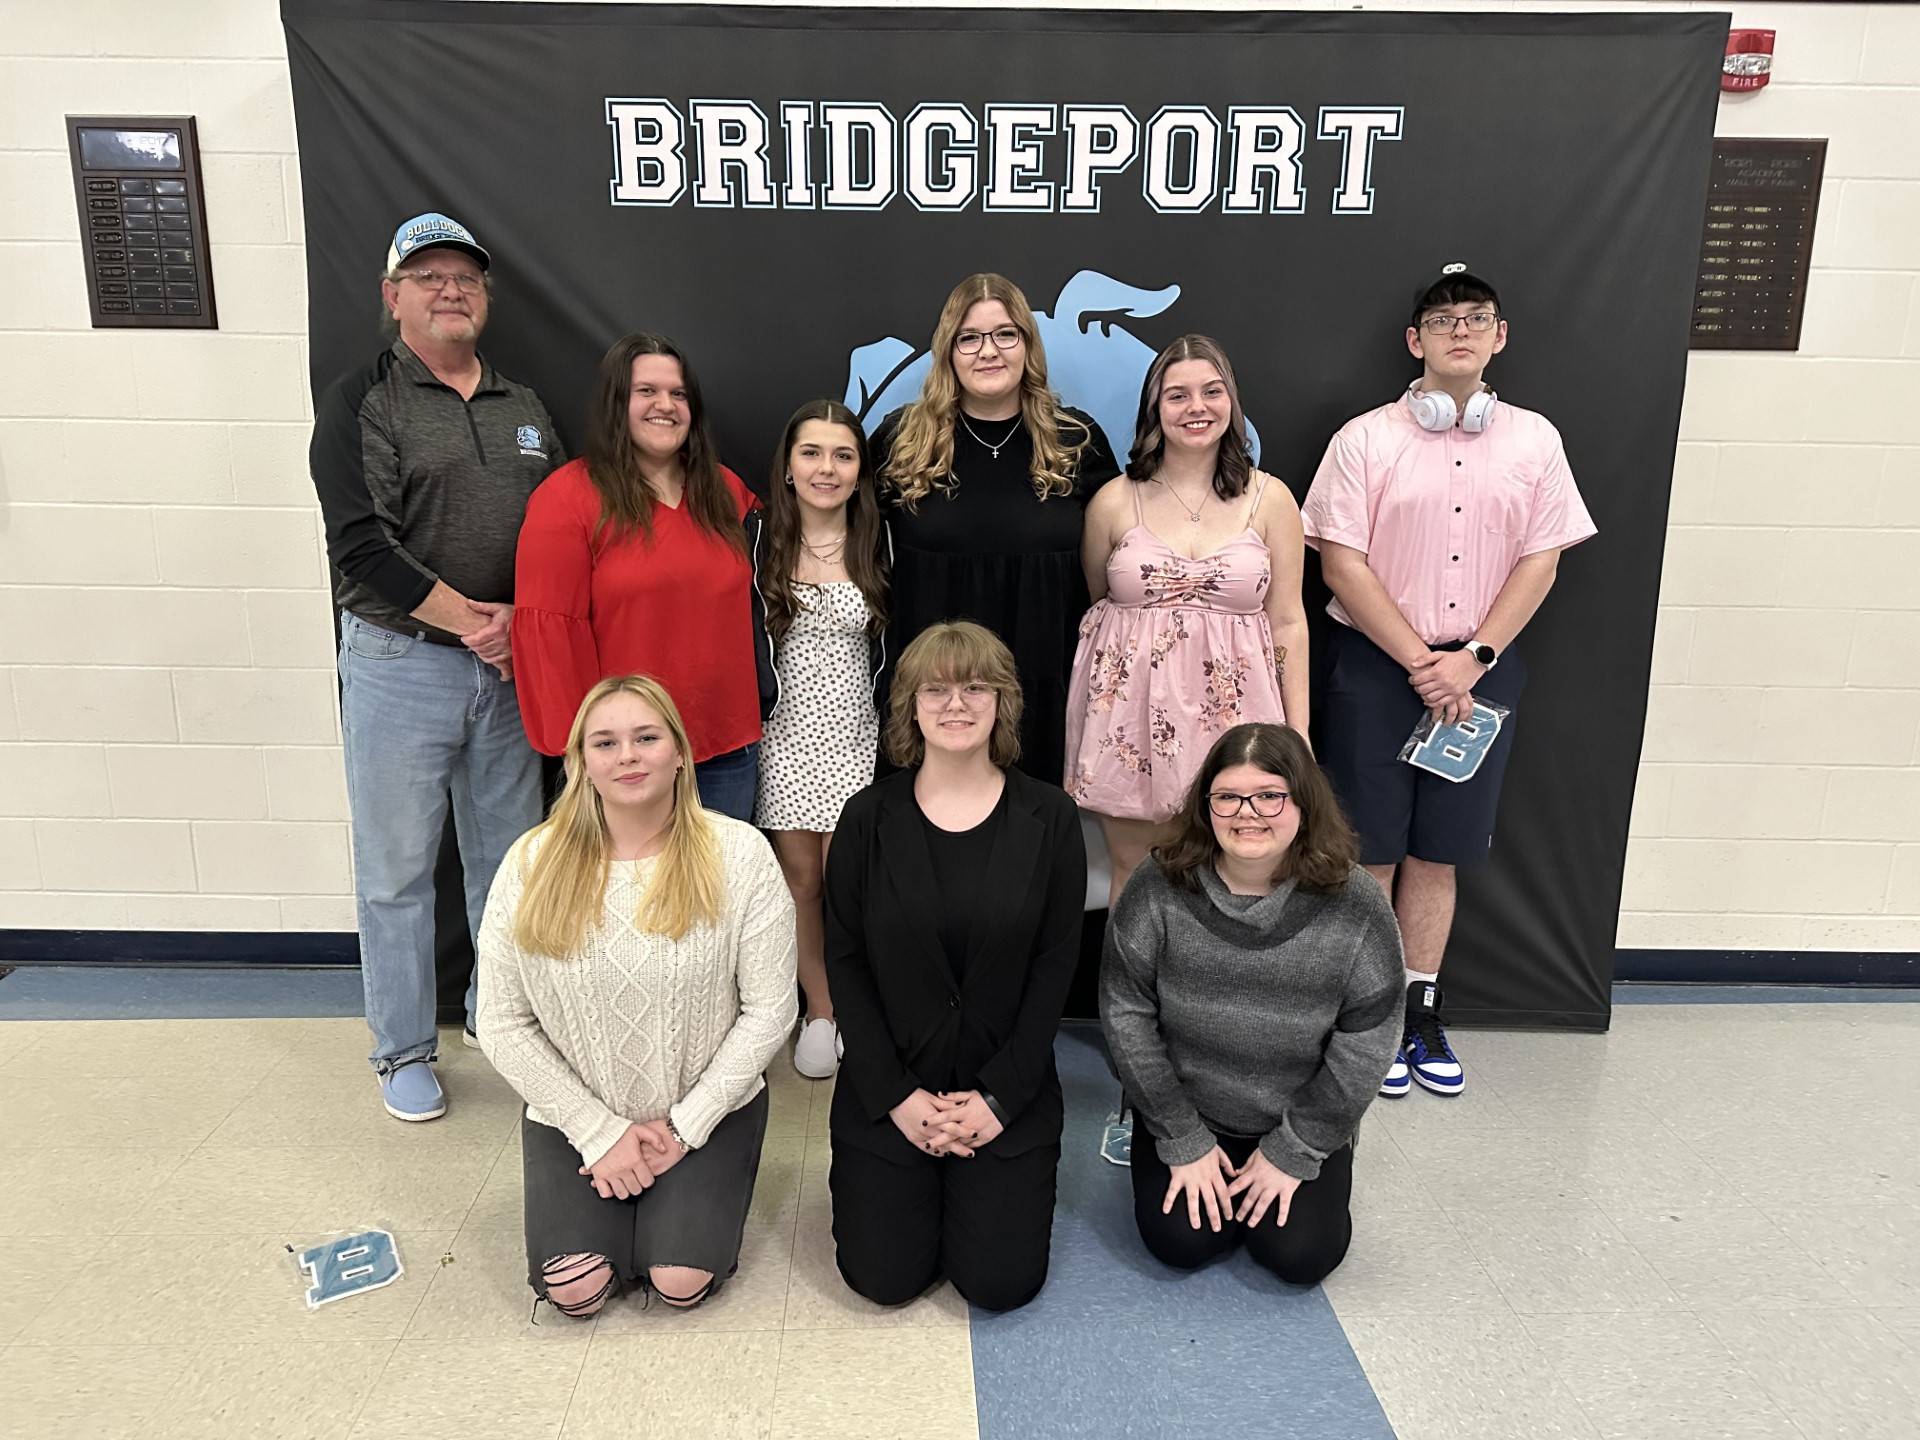 Winter Sports Recognition